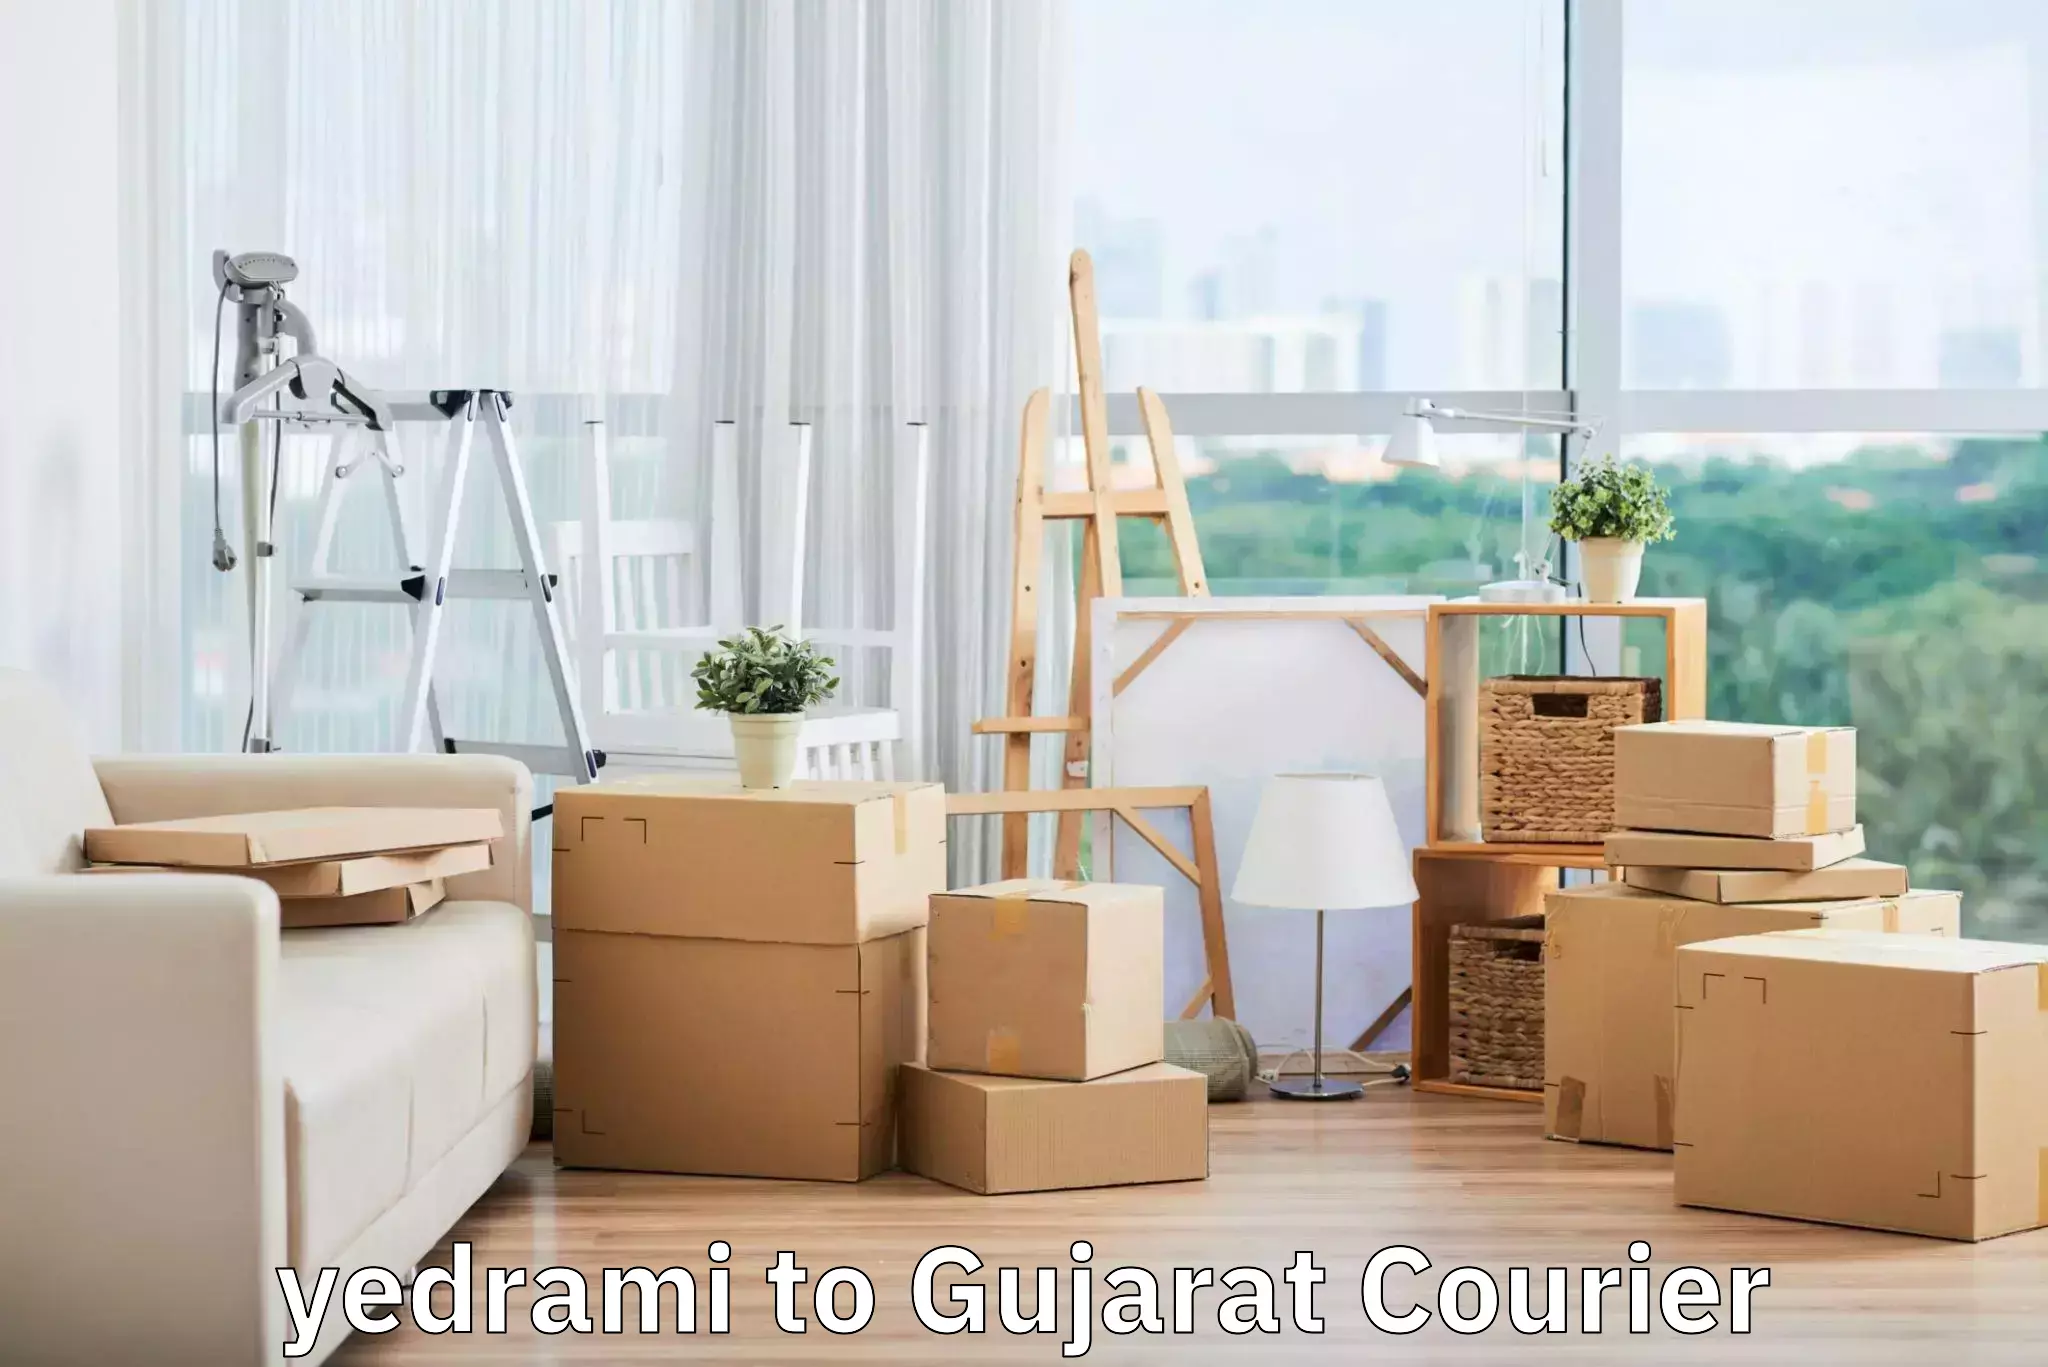 Fast track baggage delivery yedrami to Gujarat